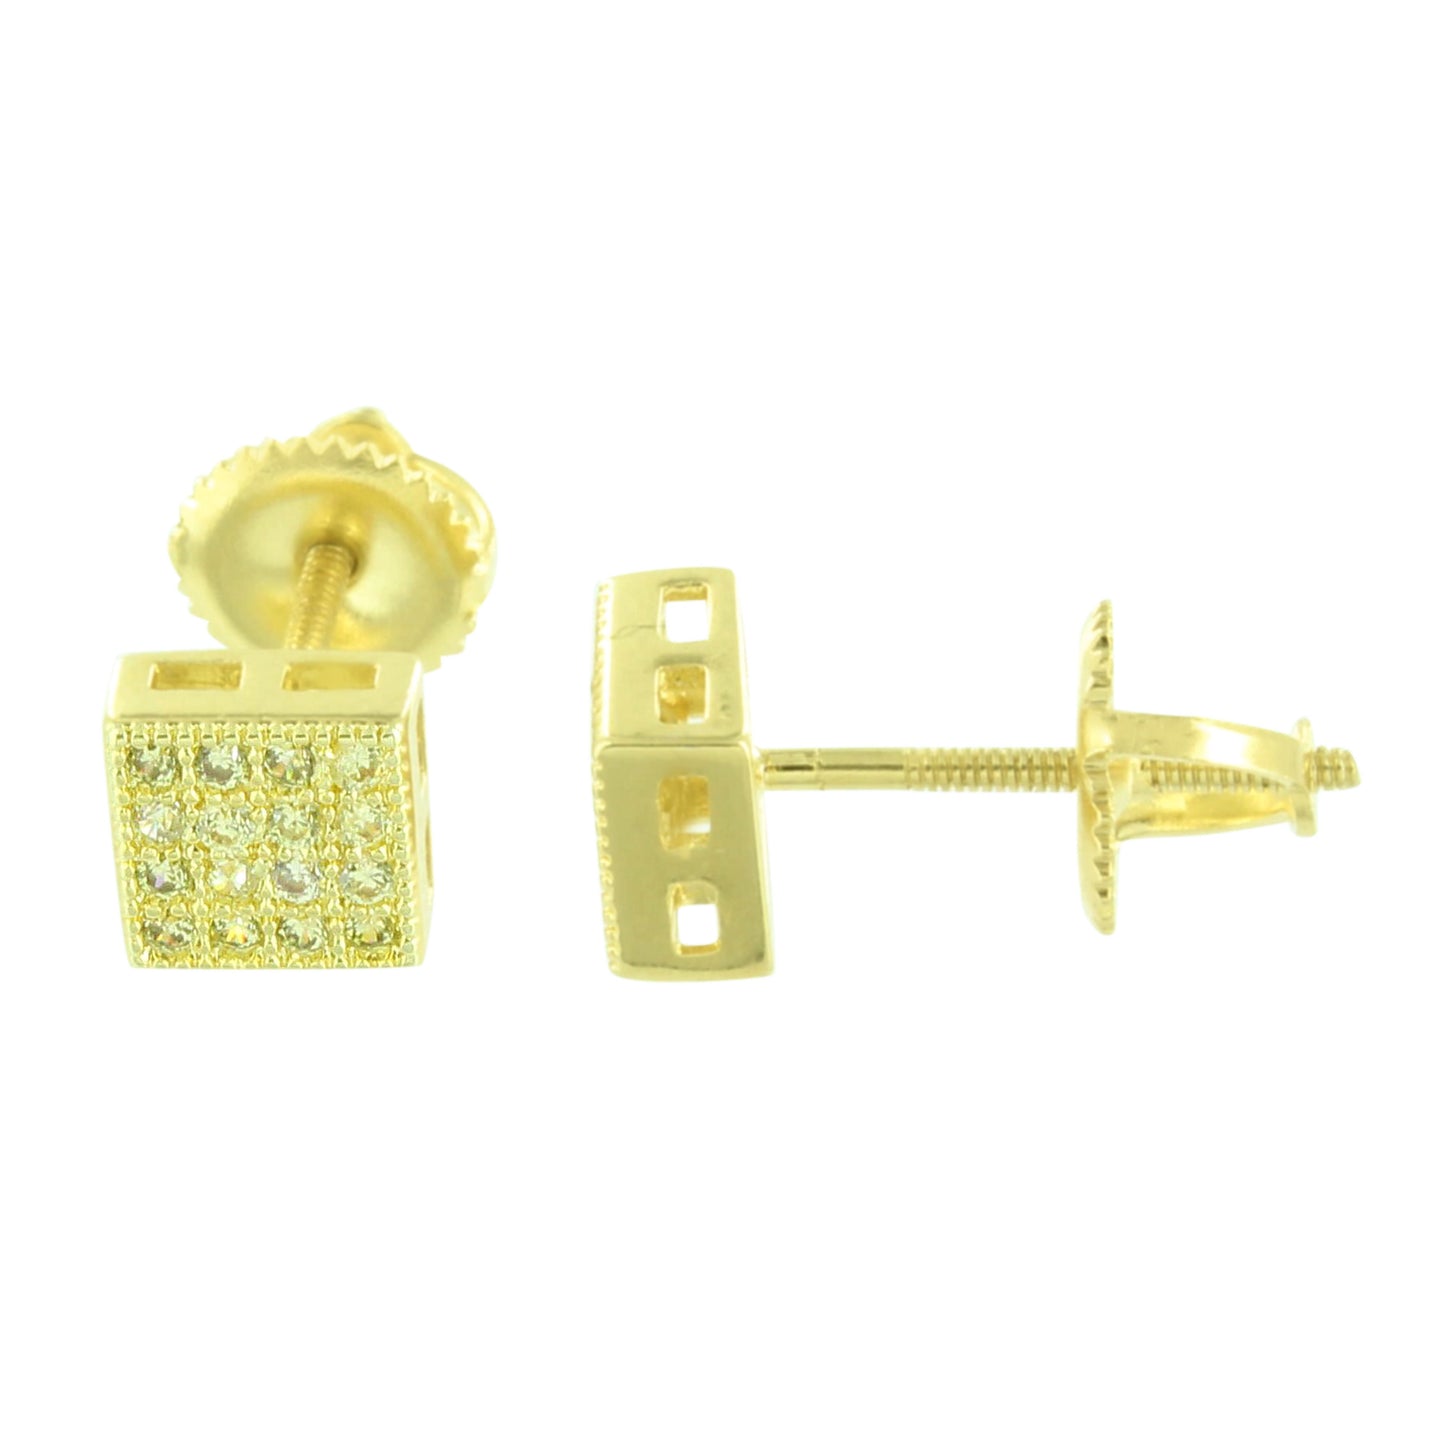 Yellow CZ Square Earrings Yellow Gold Finish Earrings Brand New